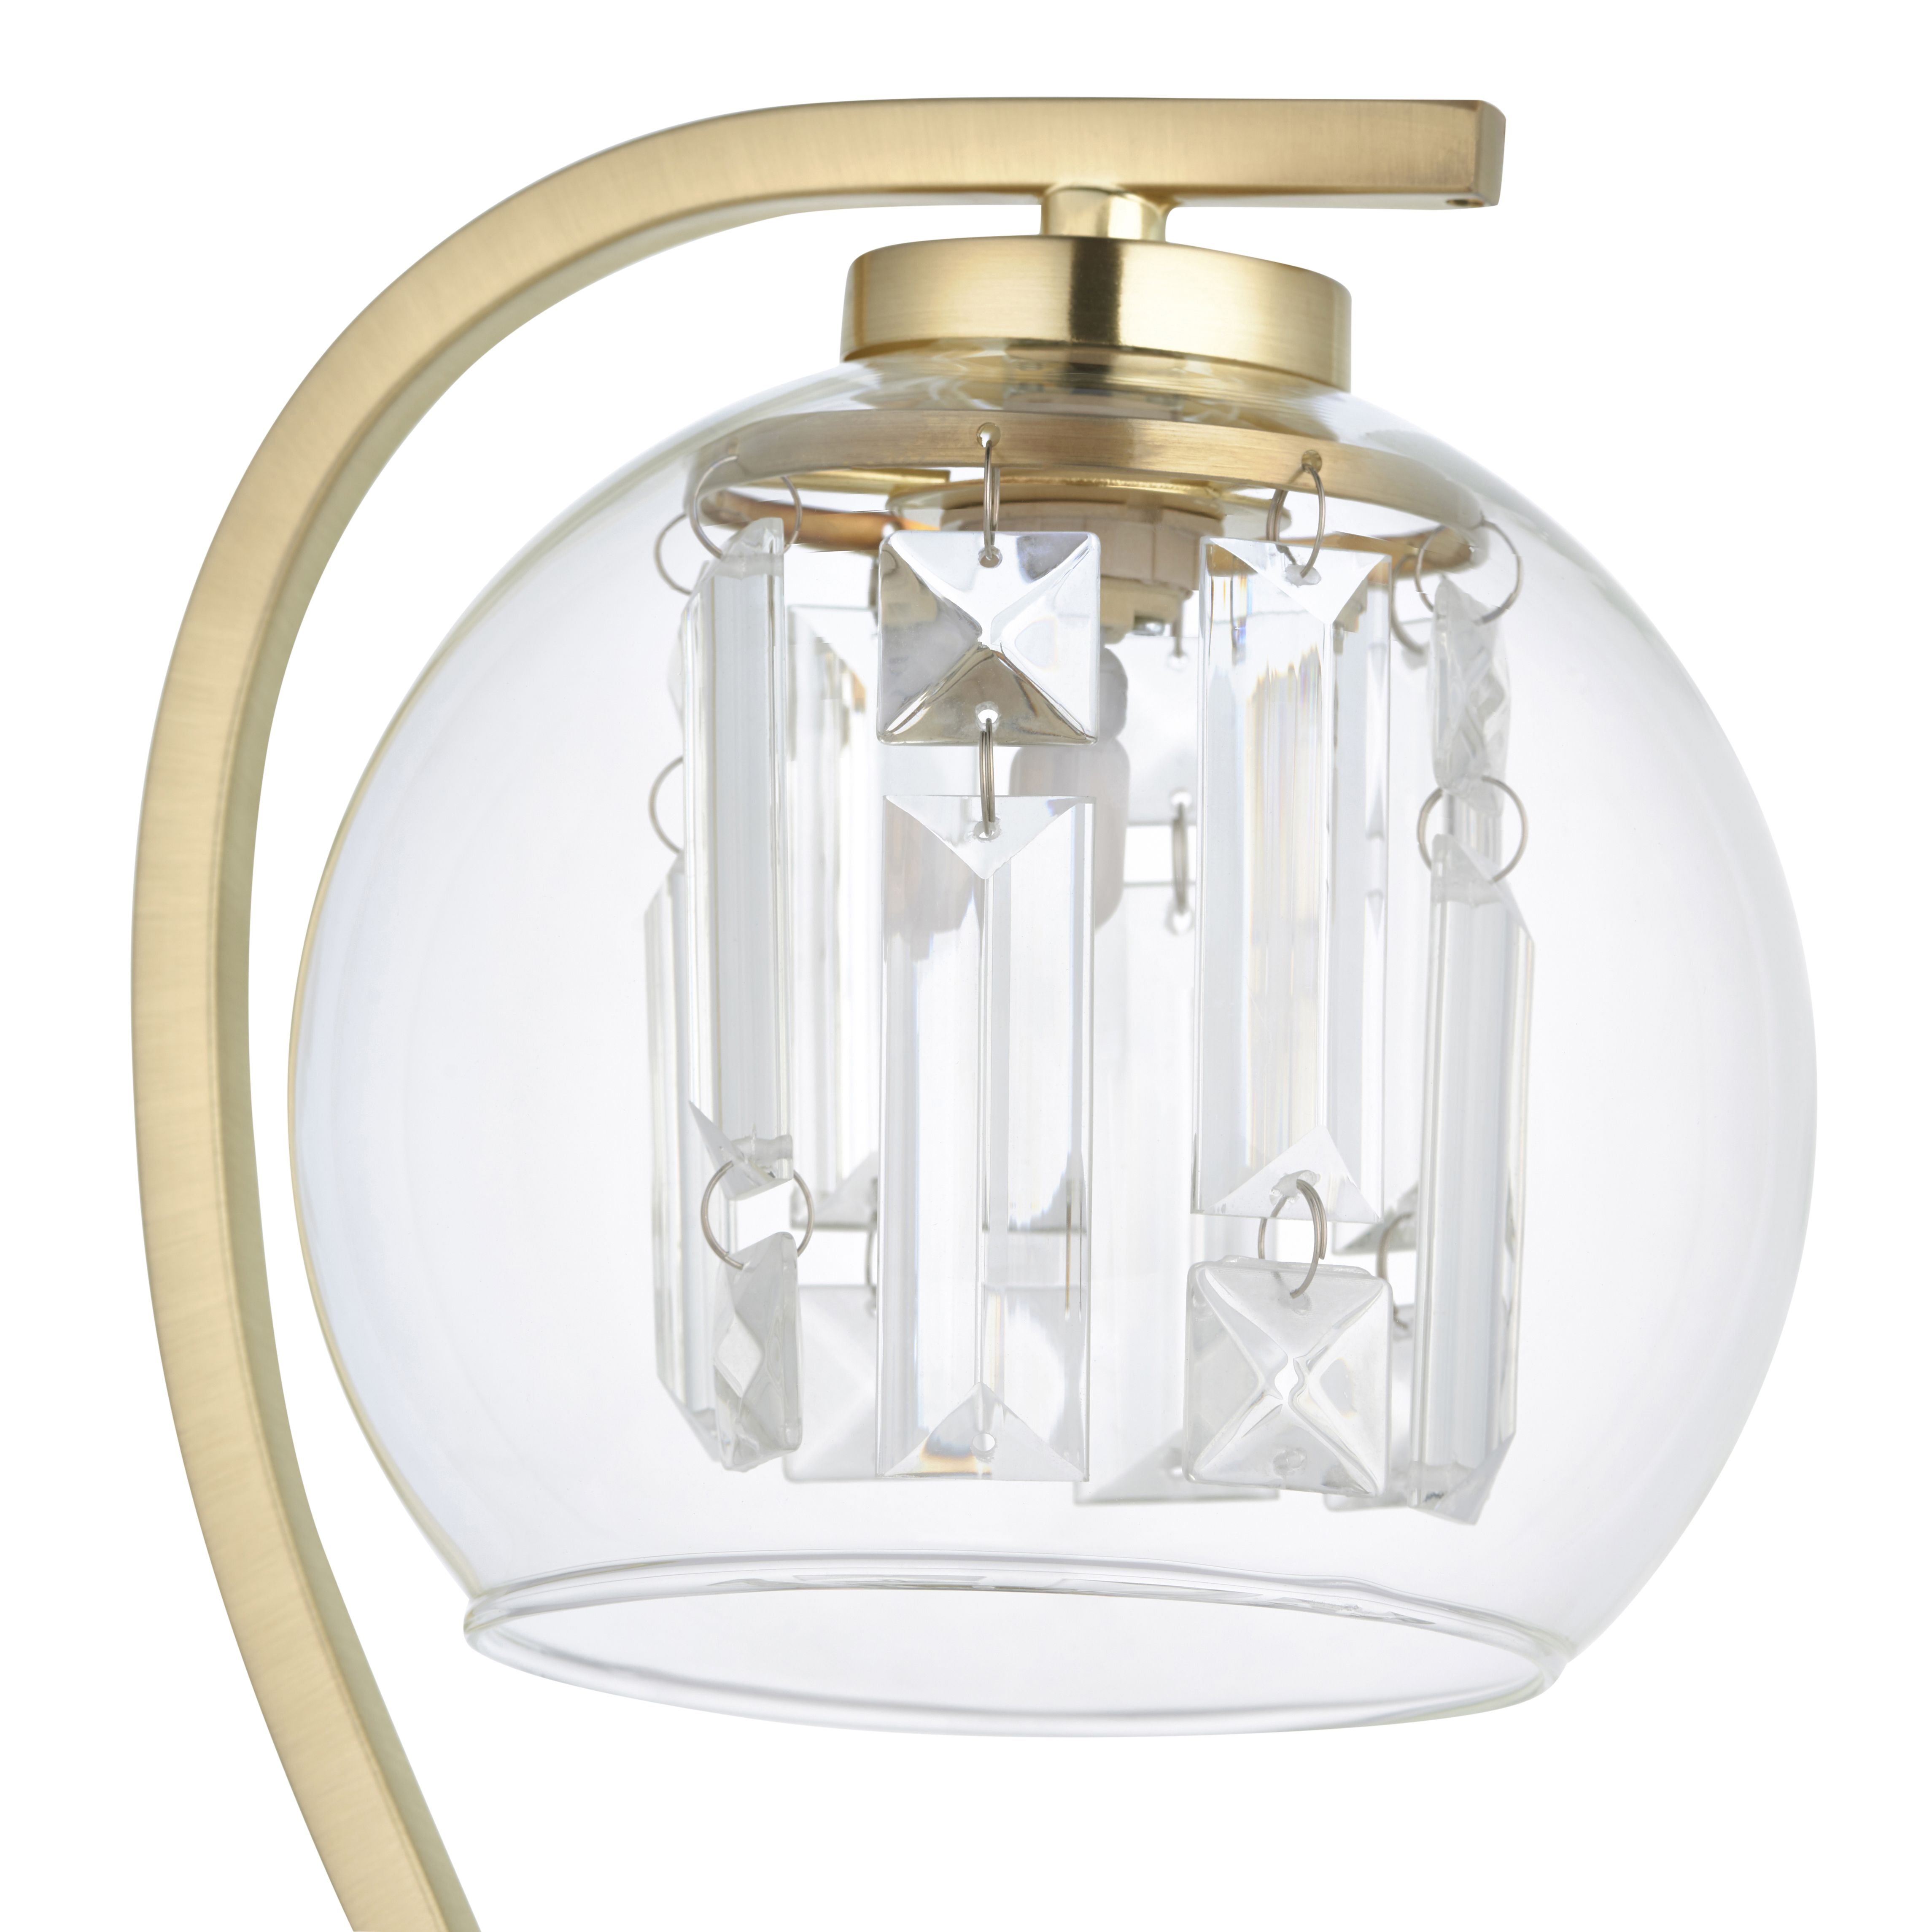 Harbour Studio Mallorie Gold Table lamp